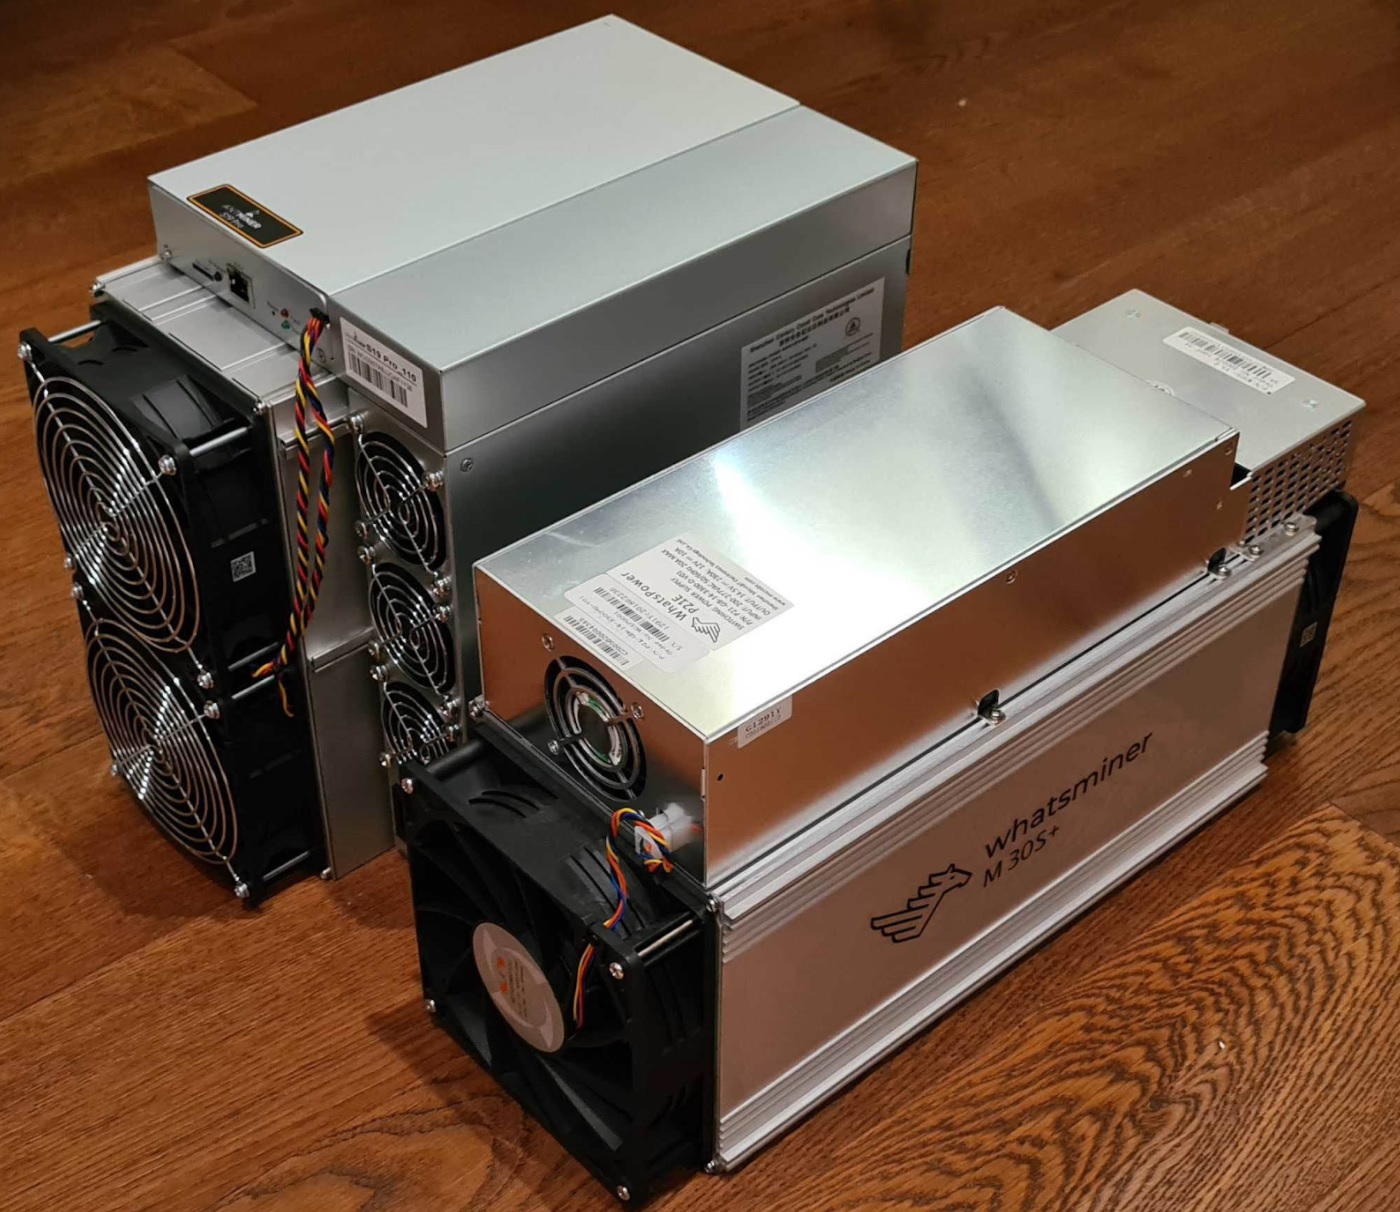 MicroBT Whatsminer M30S++ Miner TH